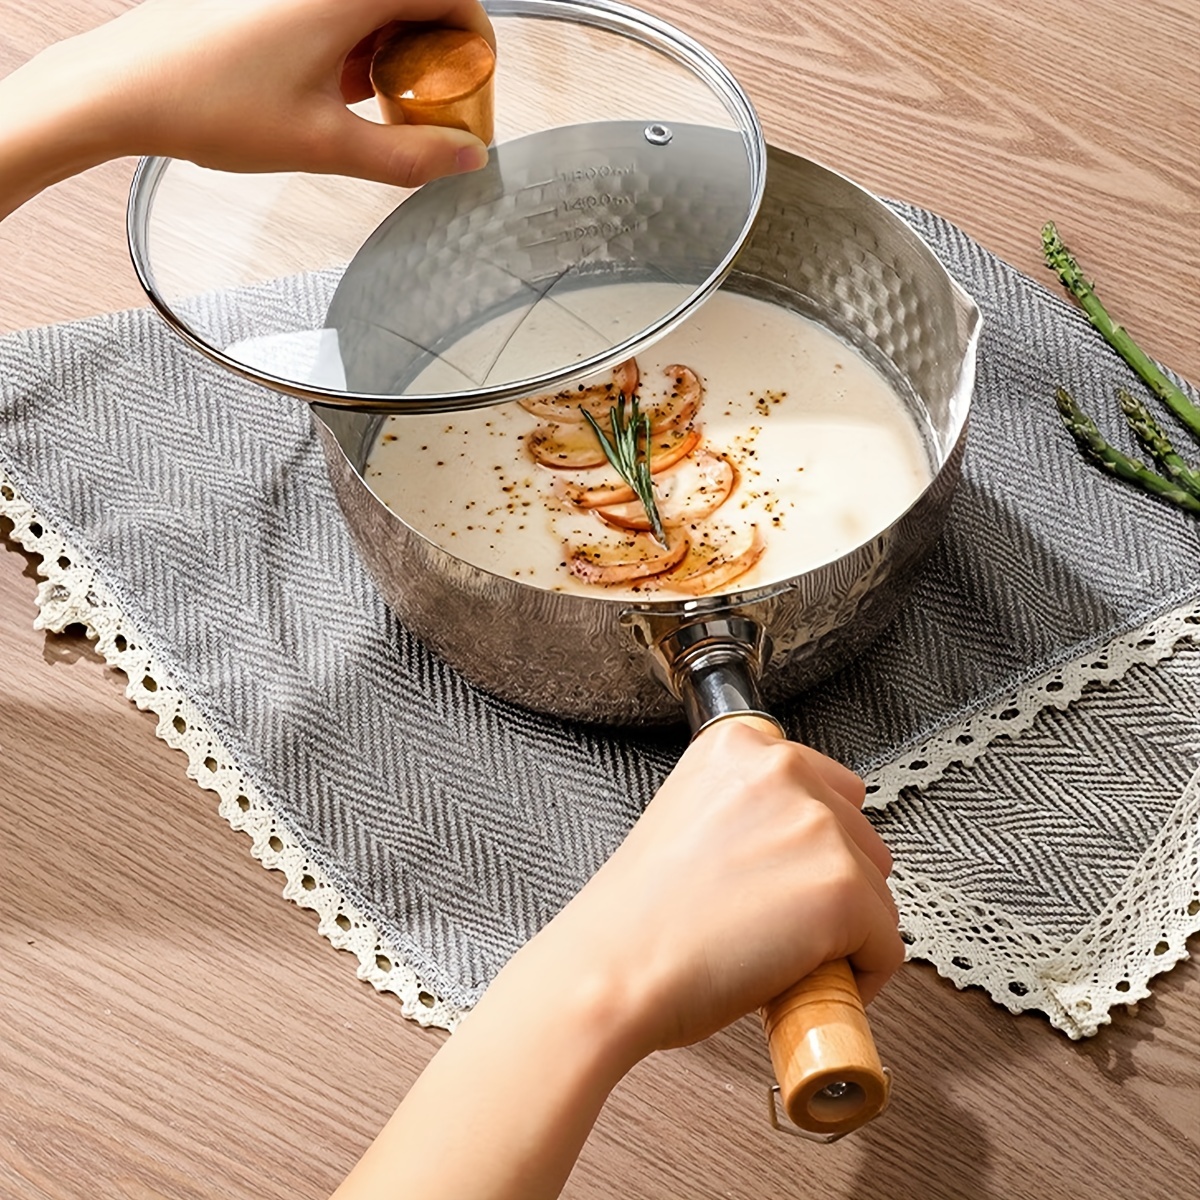 Kitchen Cookware Soup Sauce Pan Stainless Steel Japanese Snow Pan